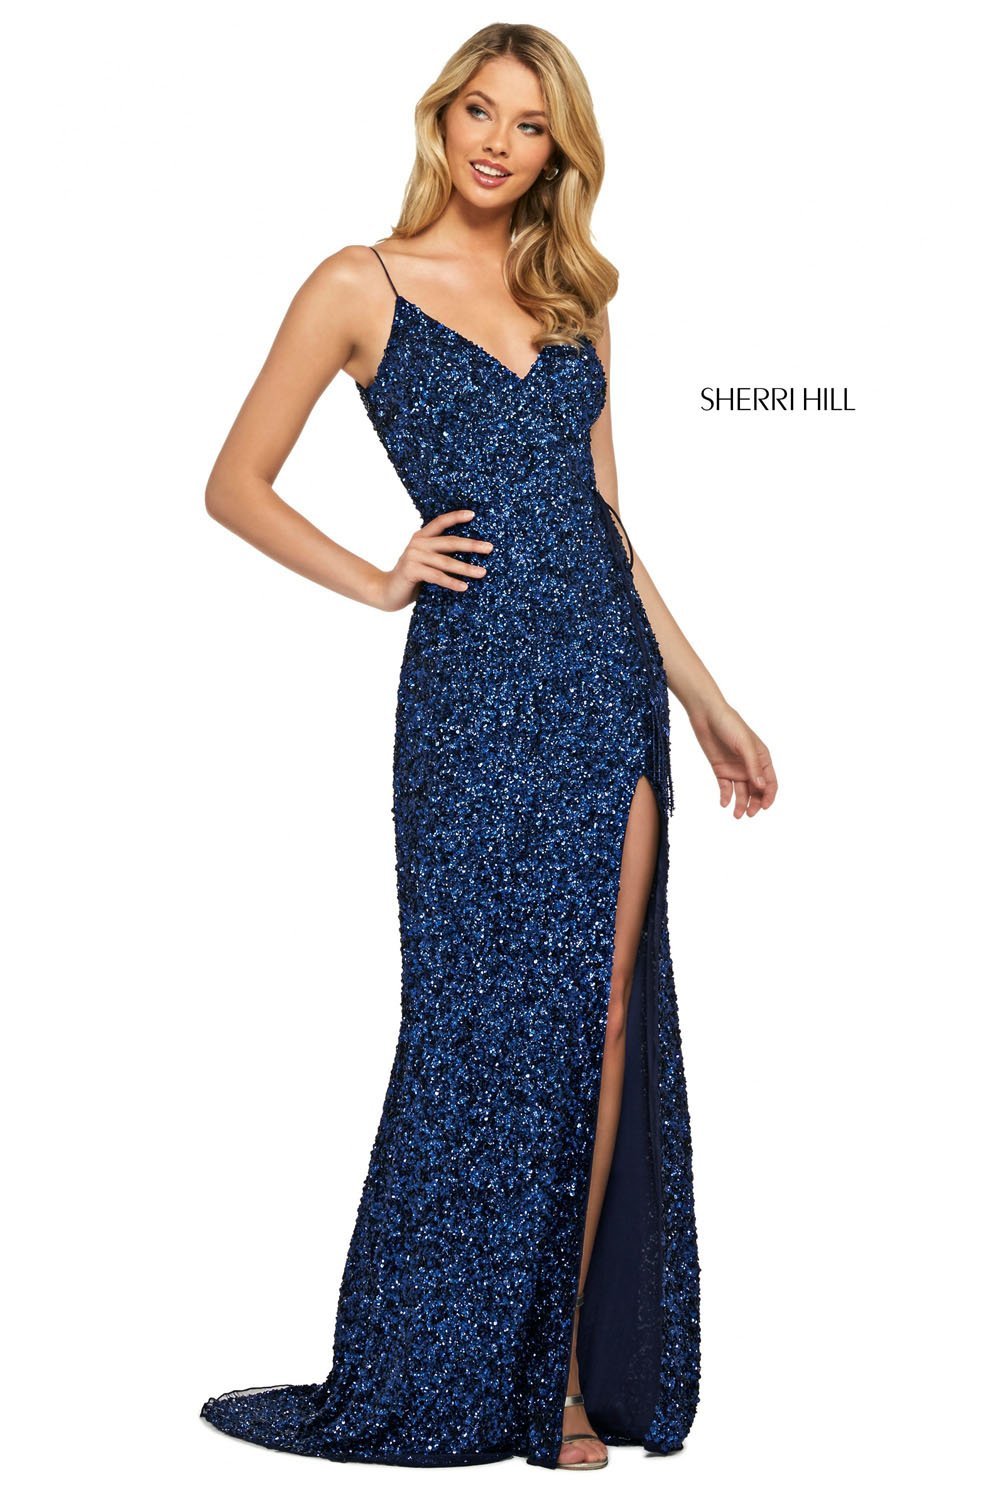 Sherri Hill 53449 dress images in these colors: Rose Gold, Gold, Emerald, Navy, Burgundy, Ivory, Periwinkle, Coral.